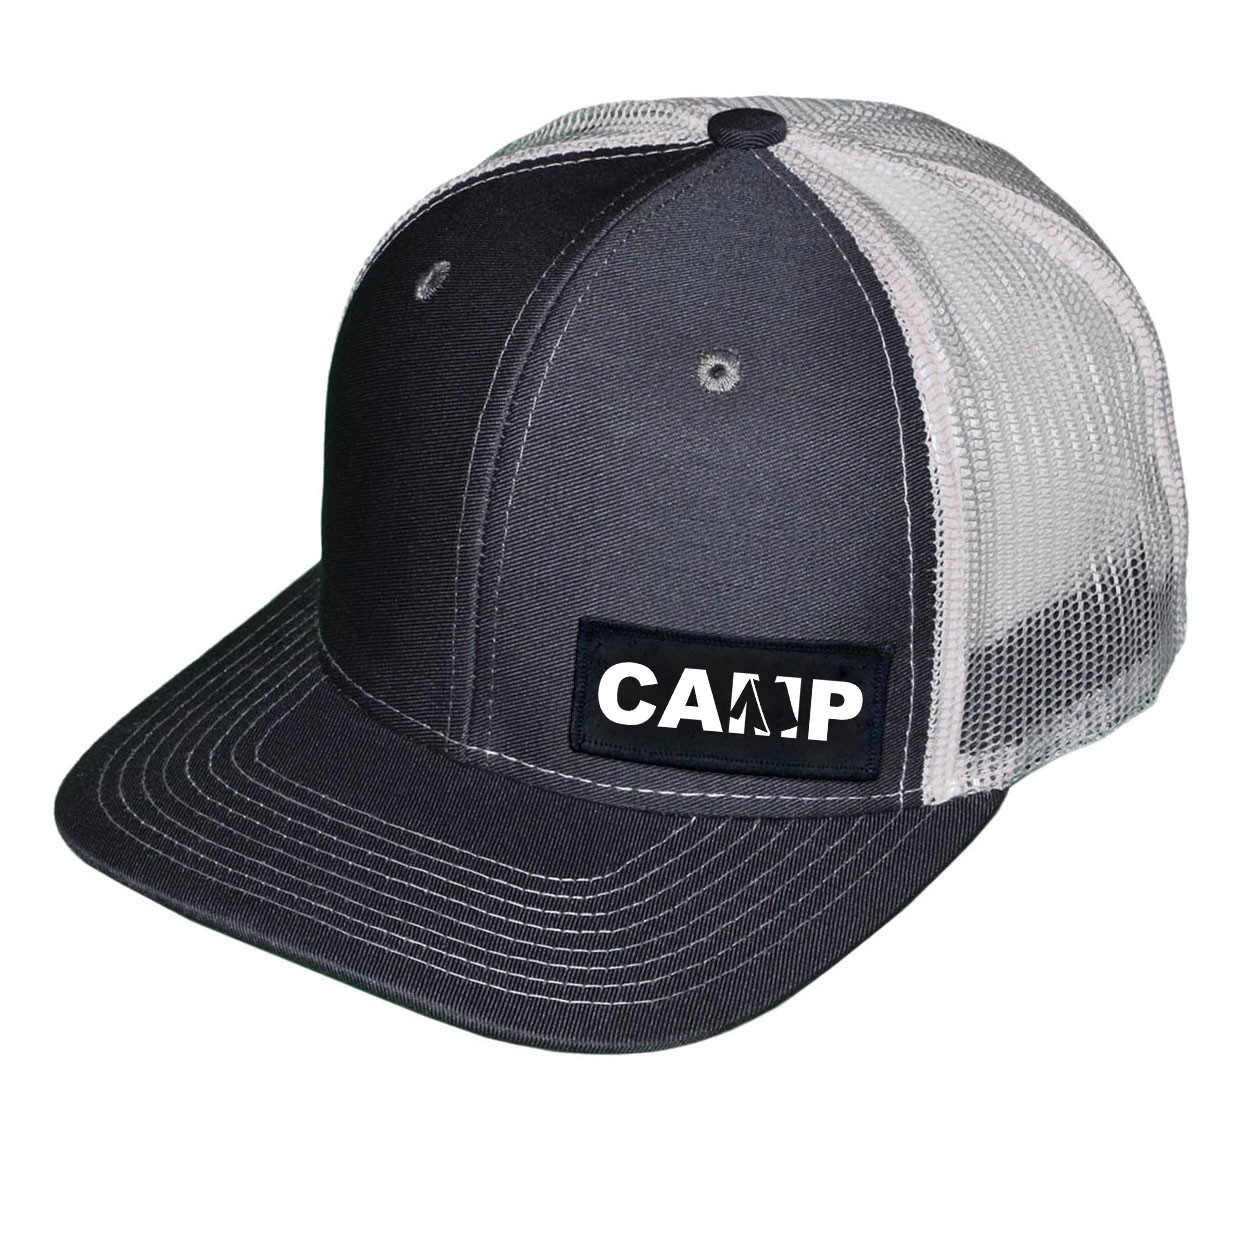 Camp Tent Logo Night Out Woven Patch Snapback Trucker Hat Gray/White (White Logo)